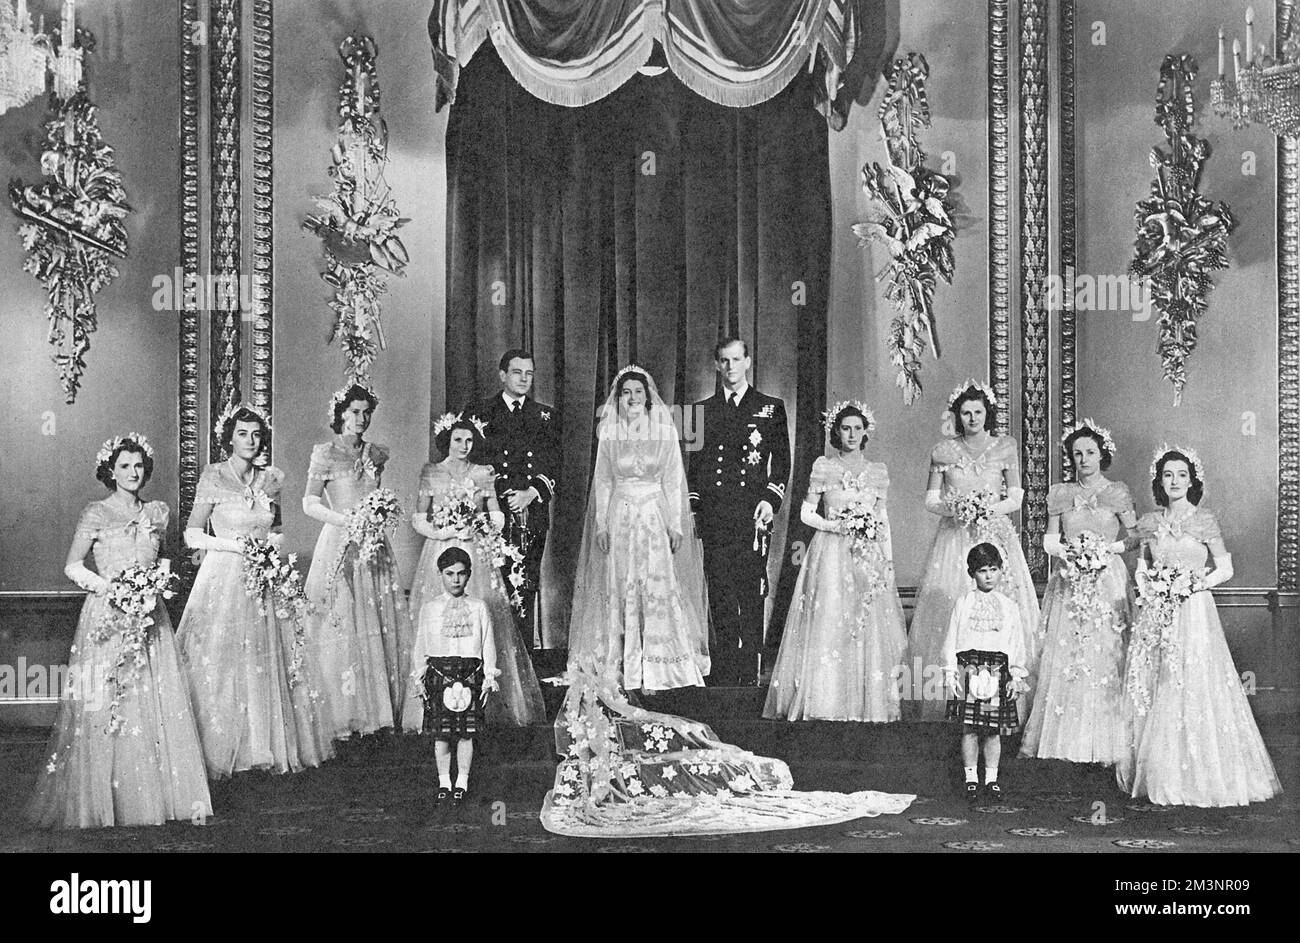 The wedding of the heir-presumptive to the British throne, Princess Elizabeth and Lieutenant Philip Mountbatten on 20 November 1947.A formal group photograph of the royal couple posed in the throne room at Buckingham Palace following the return of the royal couple from Westminster Abbey. From left to right is the Hon. Margaret Elphinstone, Lady Pamela Mountbatten, Lady Mary Cambridge, H.R.H Princess Alexandra of Kent, the Marquess of Milford Haven(the Groomsman), H.R.H Princess Margaret, Lady Caroline Montagu-Douglas Scott, Lady Elizabeth Lambart and Lady Diana Bowes-Lyon. The pages are H.R.H Stock Photo